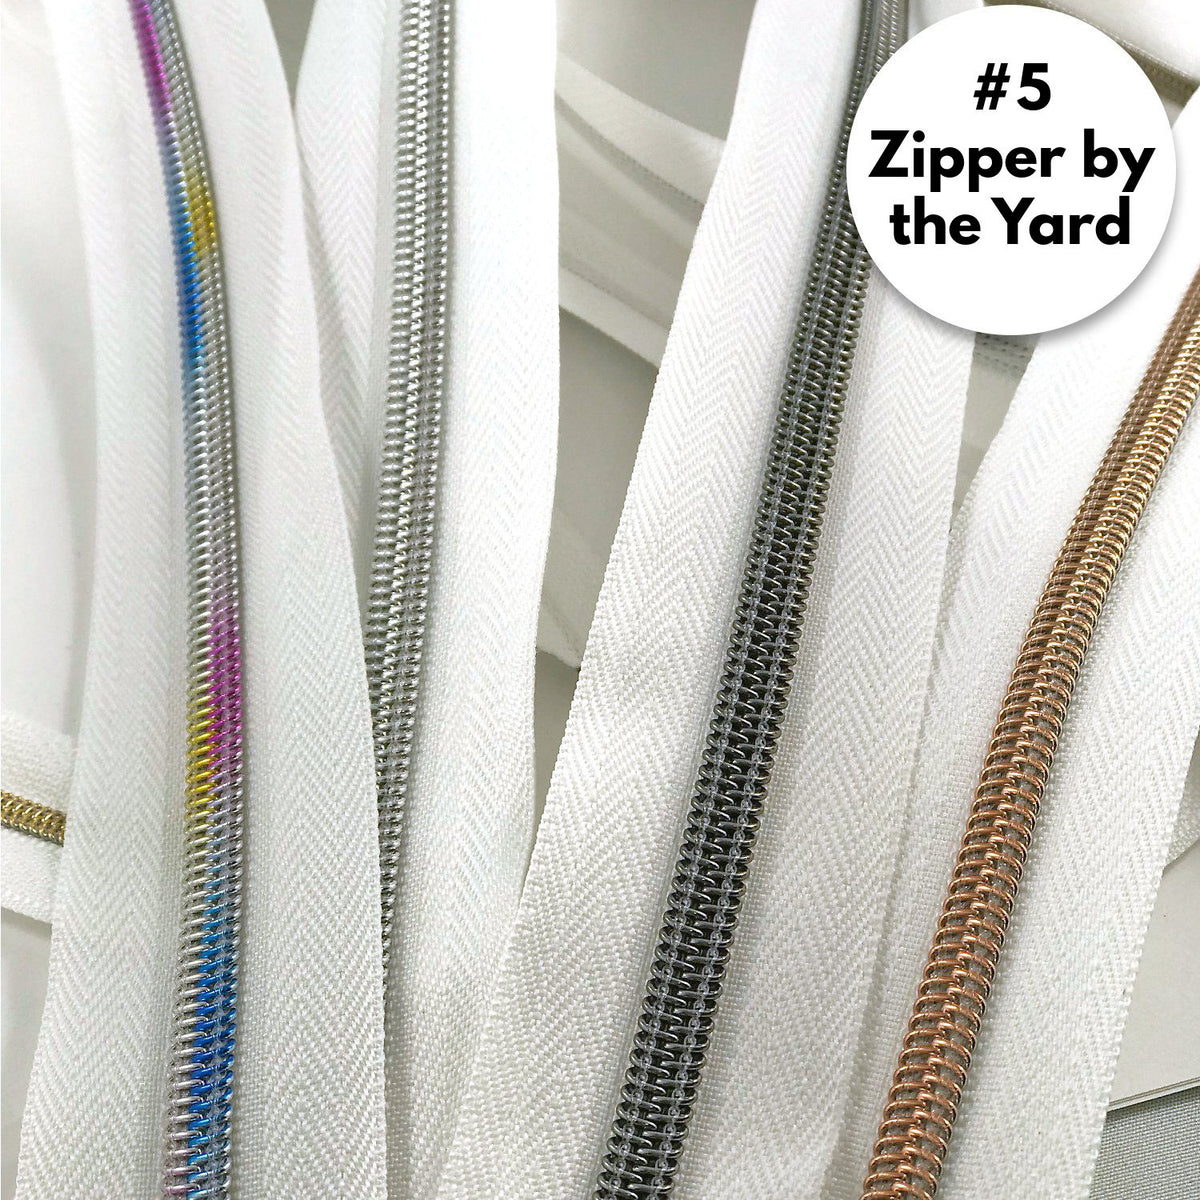 #4.5 Zipper by the Yard (4 Yards of Tape with 16 Pulls)